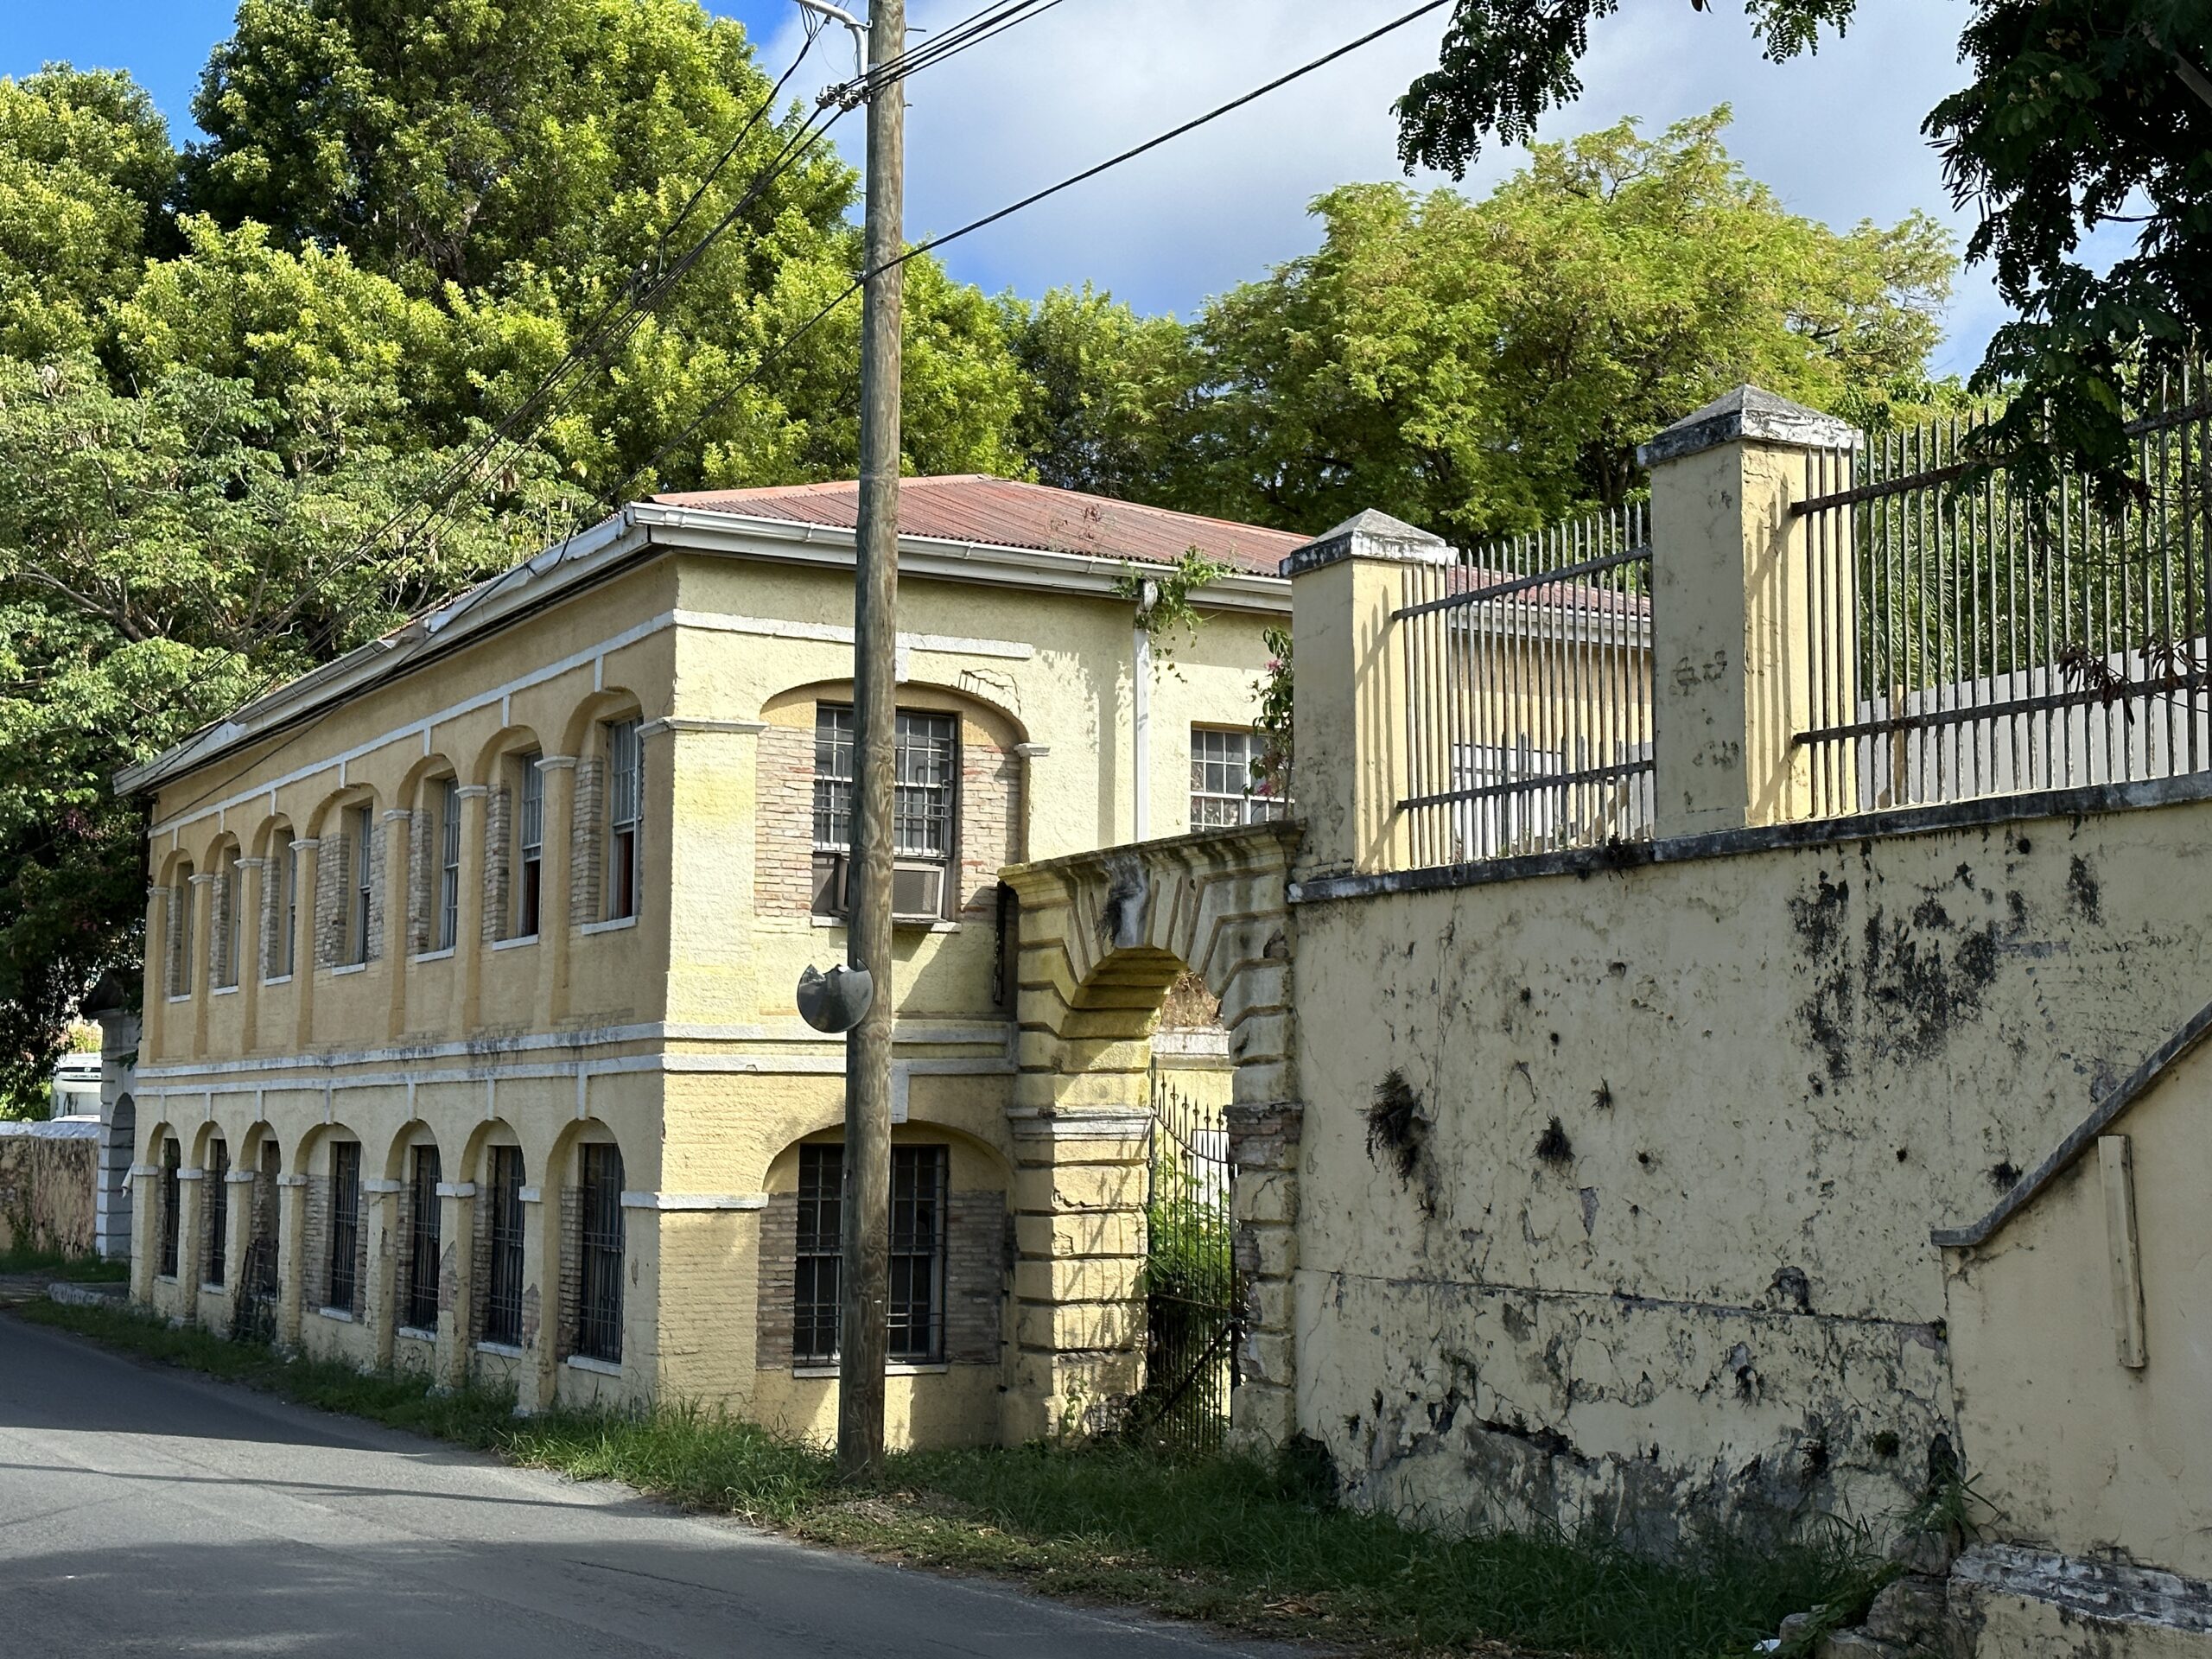 The Danish ruins on Hospital Street on St. Croix have changed little. Plans for renovation have been made but the only changes on August 4, 2023 are the addition of plywood to coverup some of the areas which have become dangerous. (Source photo by Linda Morland)